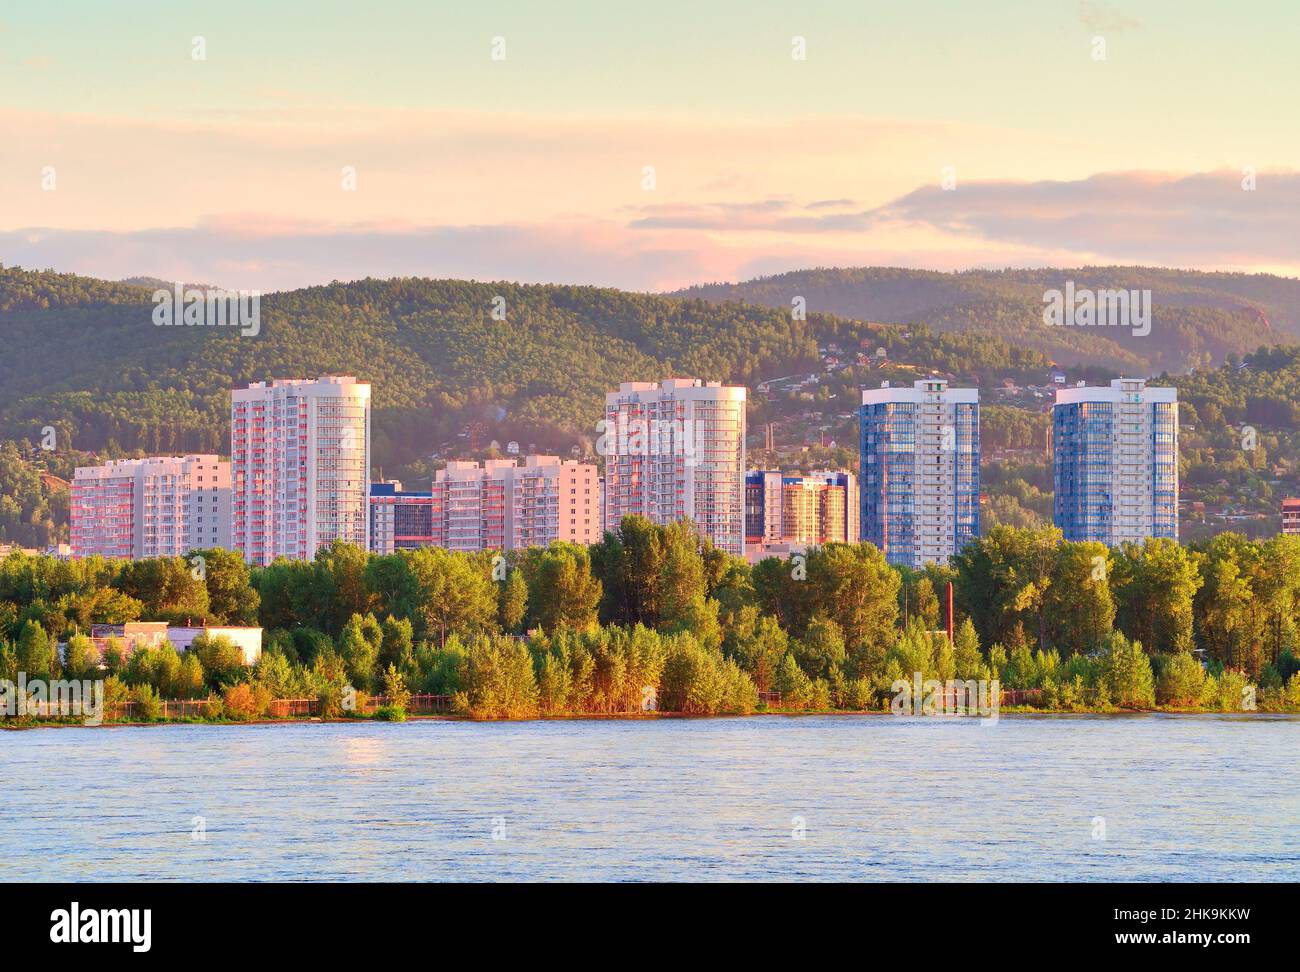 Construction of Yaryginskaya embankment on the bank of the Yenisei River against the background of green hills. Siberia, Russia Stock Photo